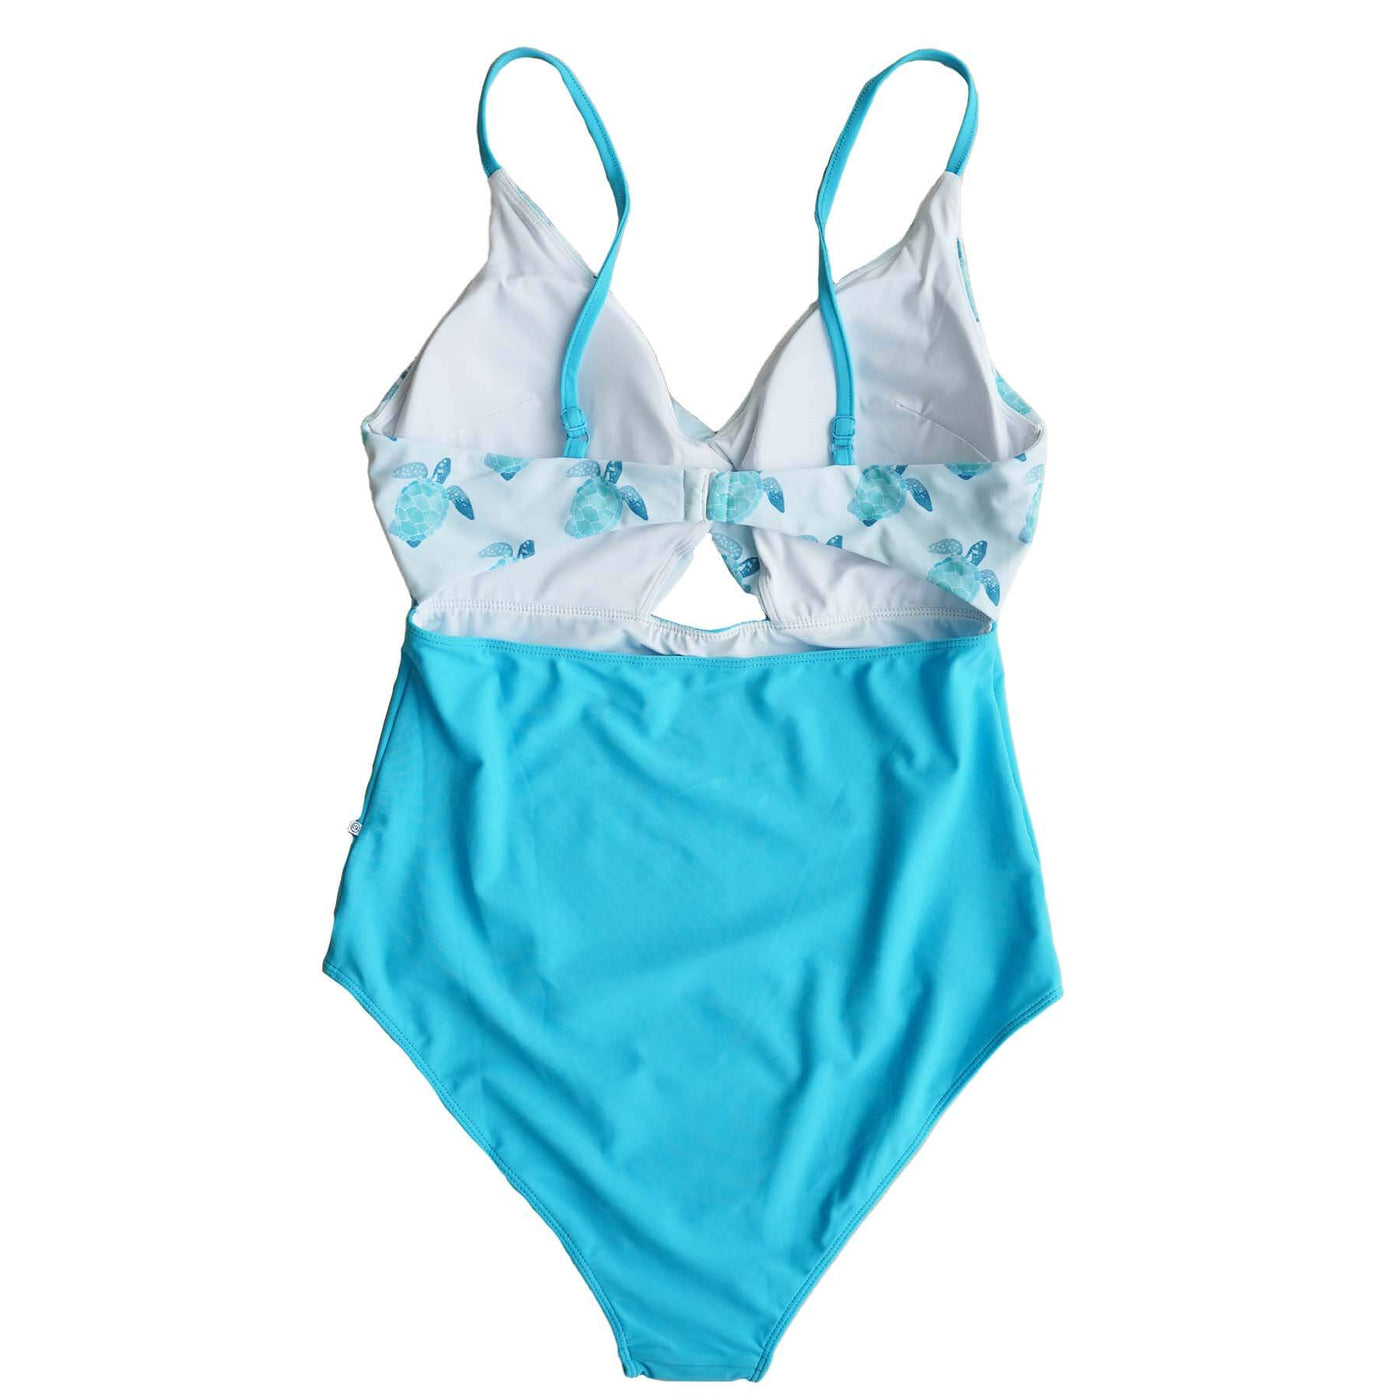 cutout swimsuit for women with blue turtles cutout back